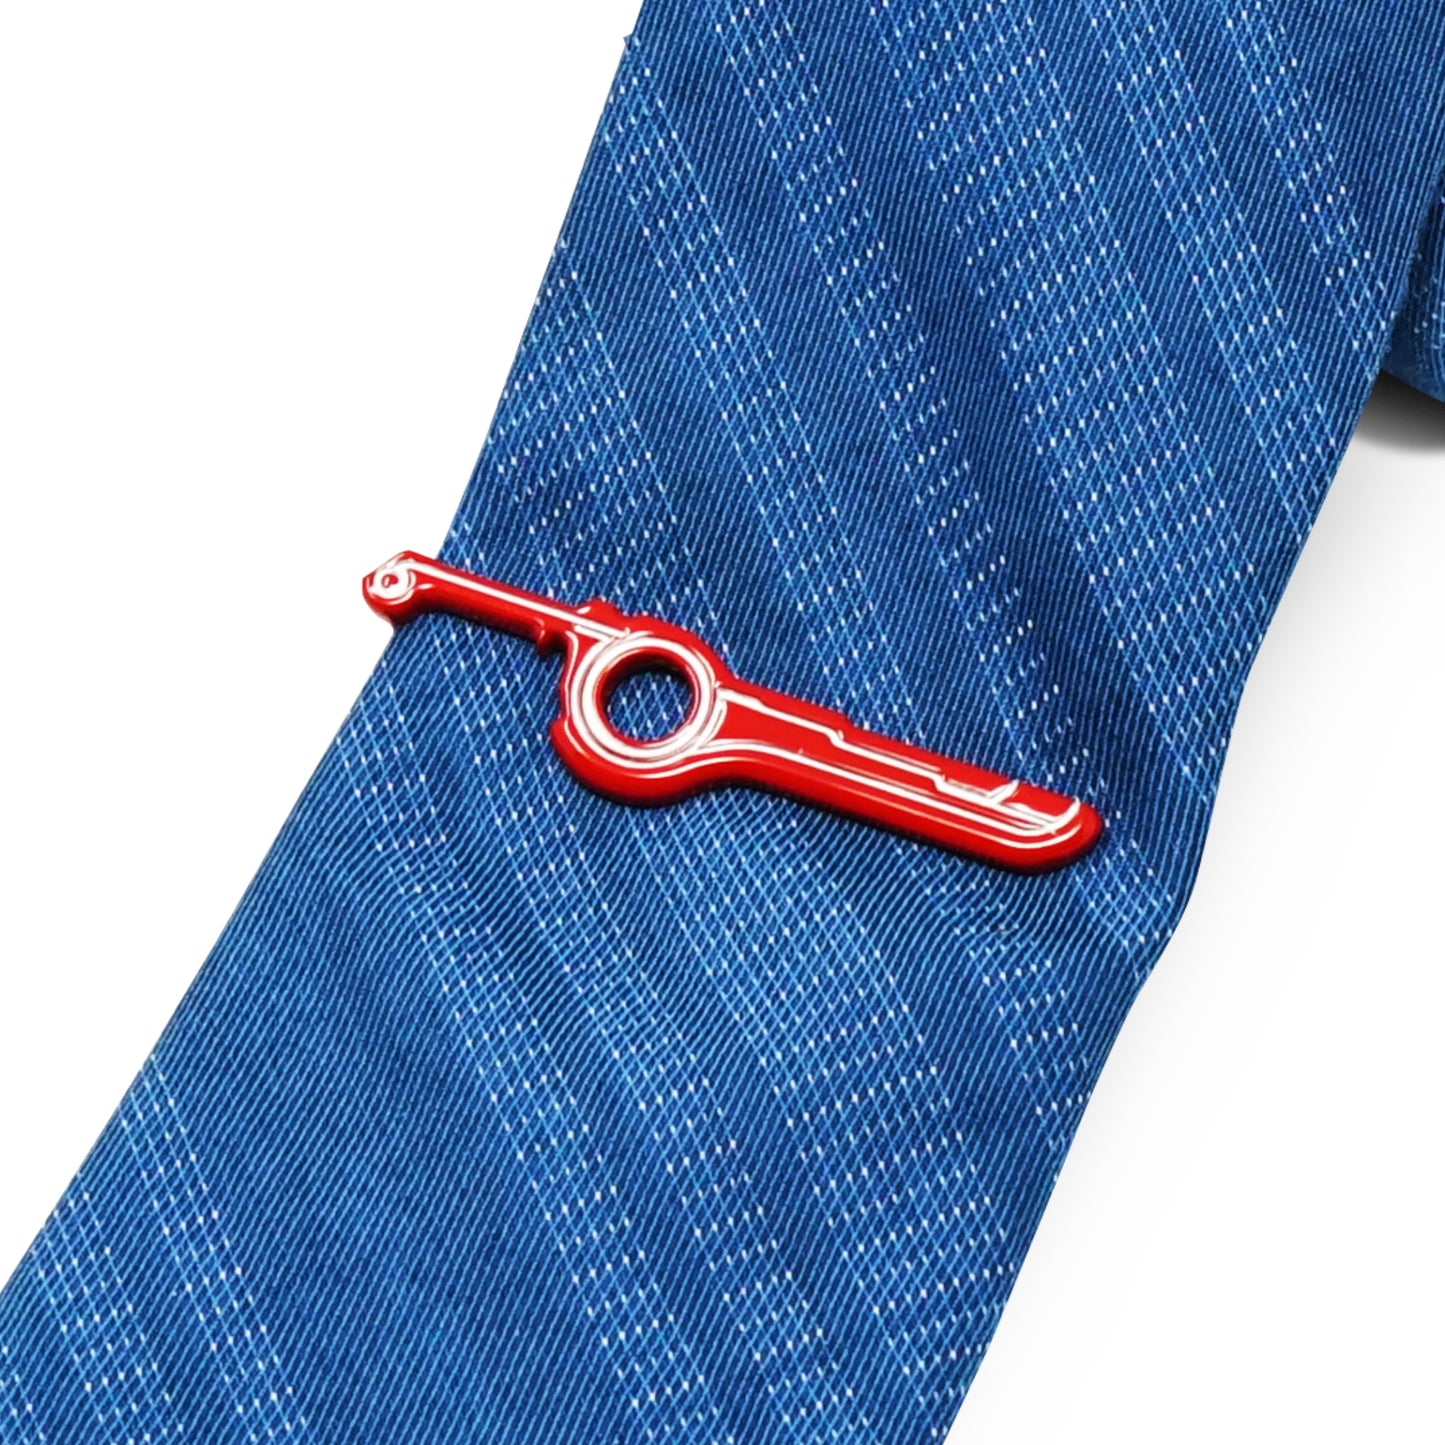 The Sword Of Foresight (Tie Clip)